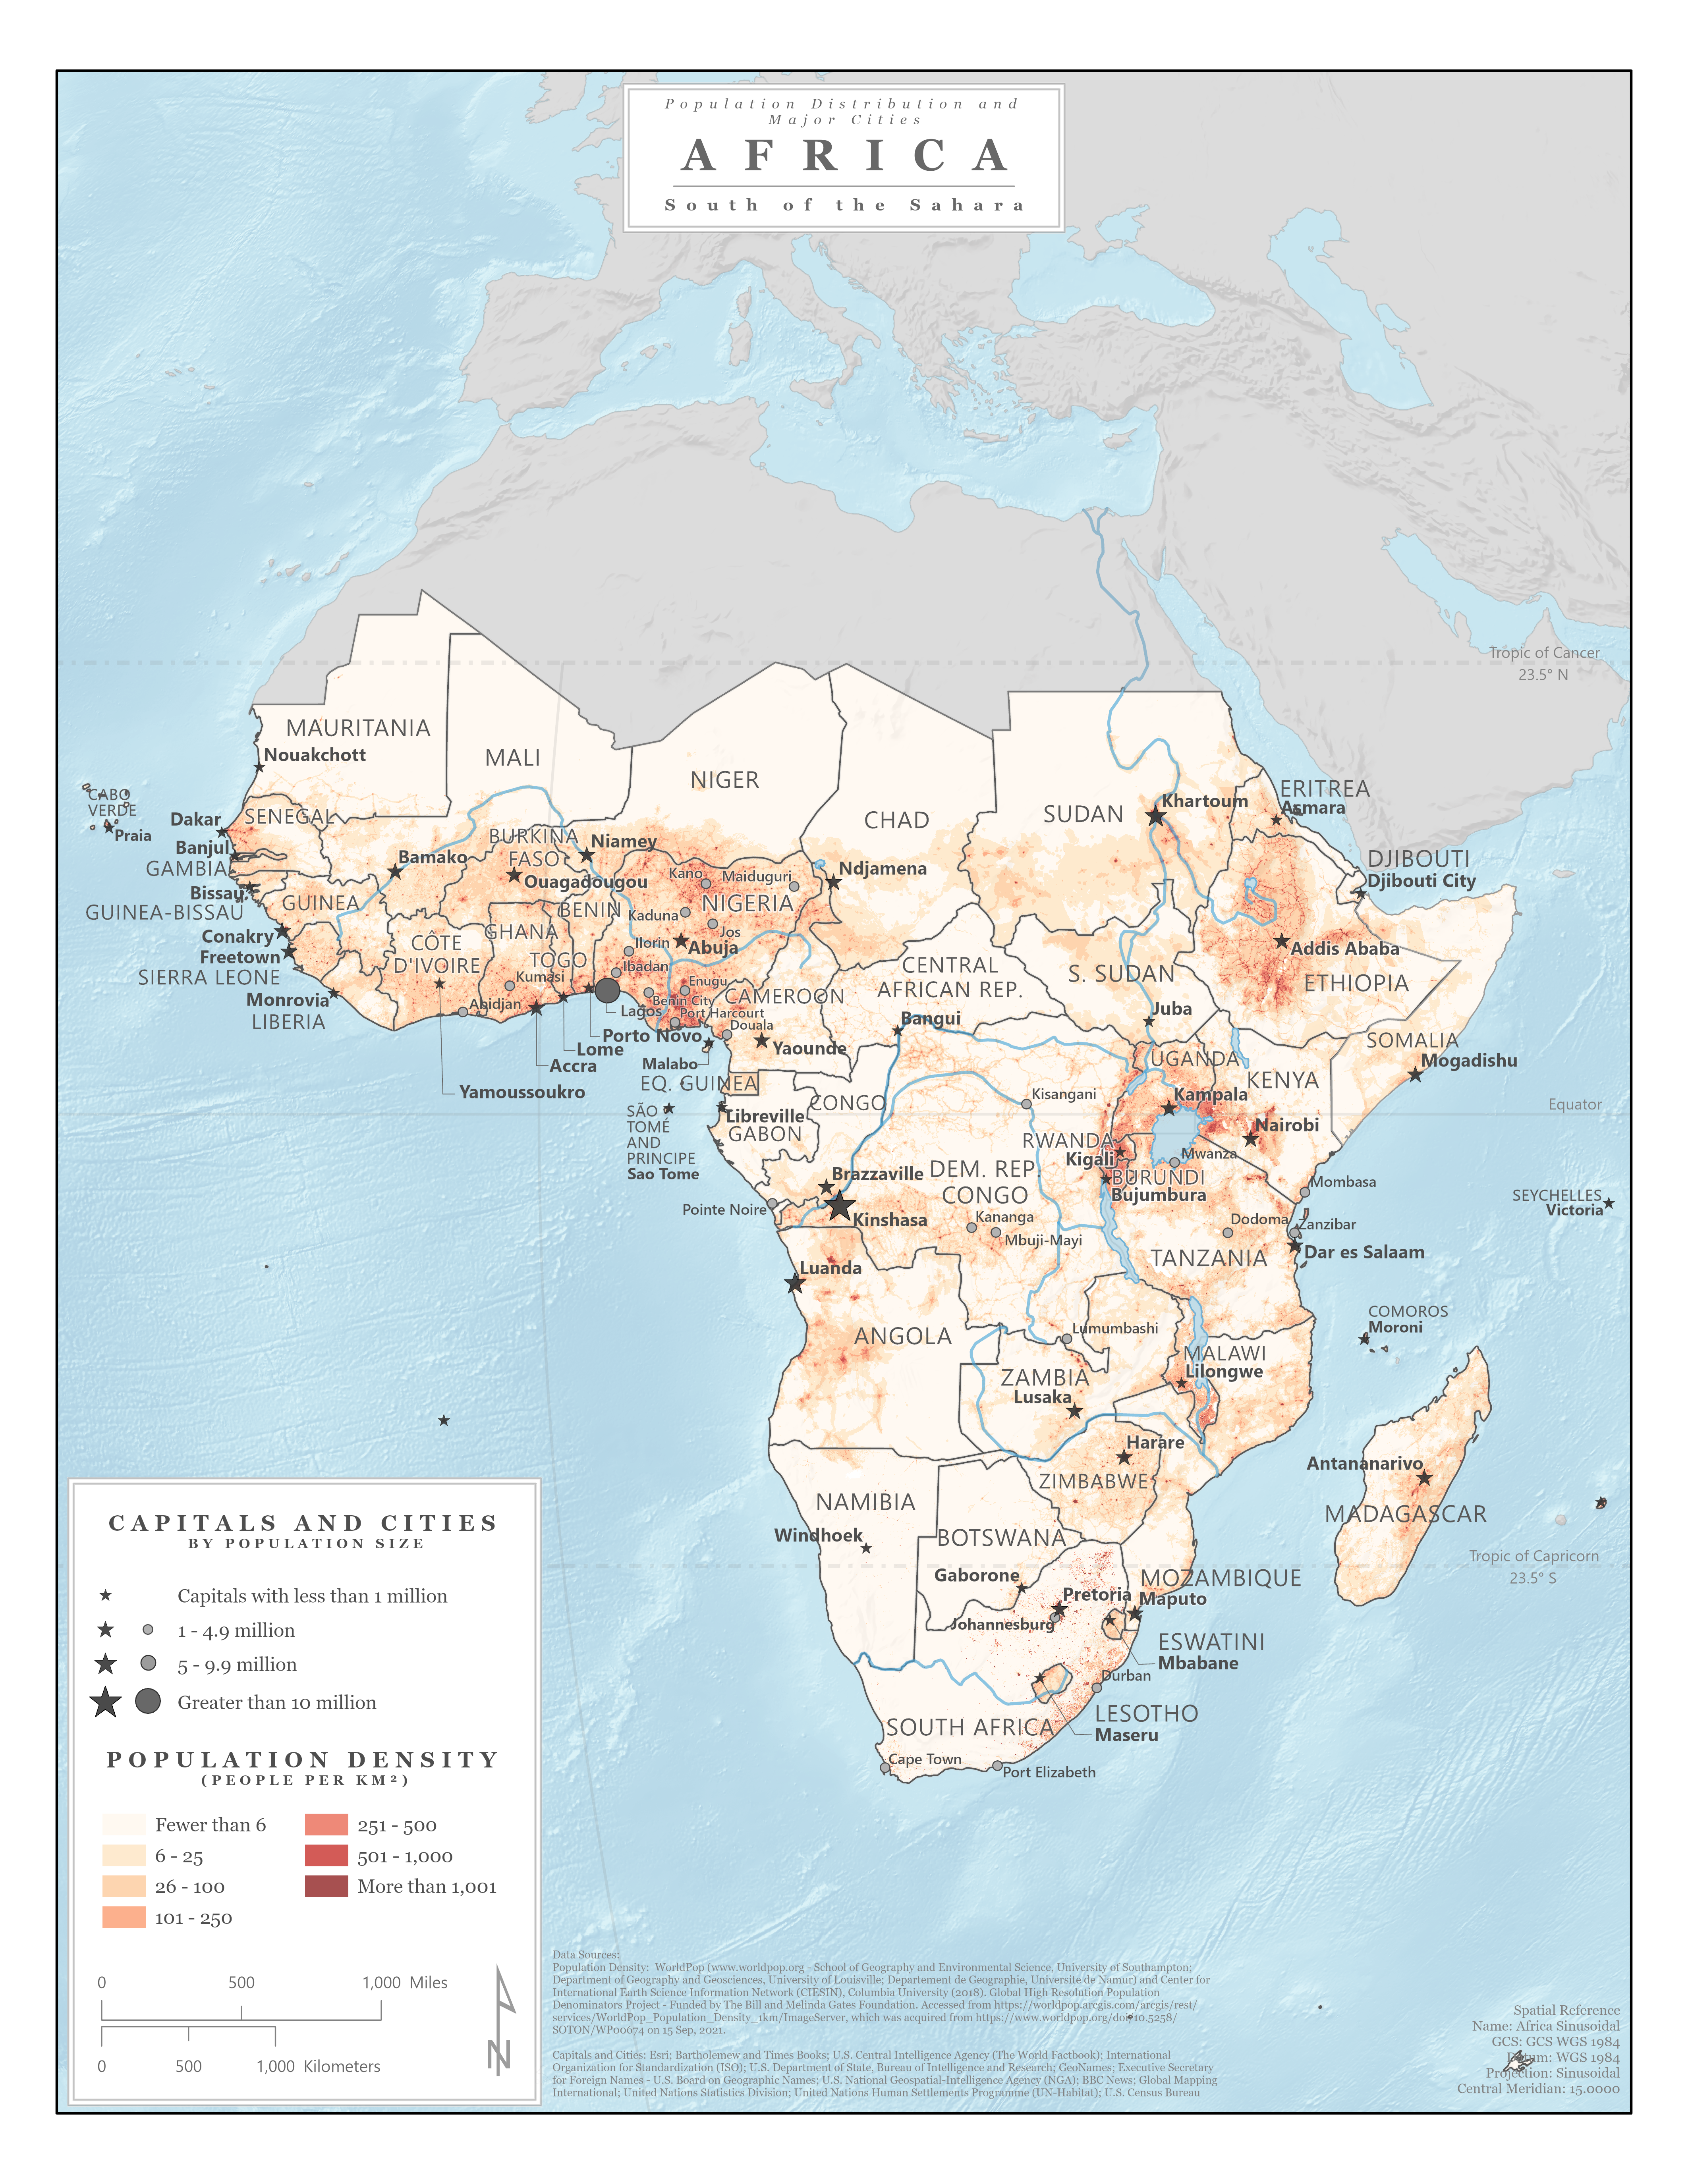 Countries, capitals, and population sizes map of Africa South of the Sahara